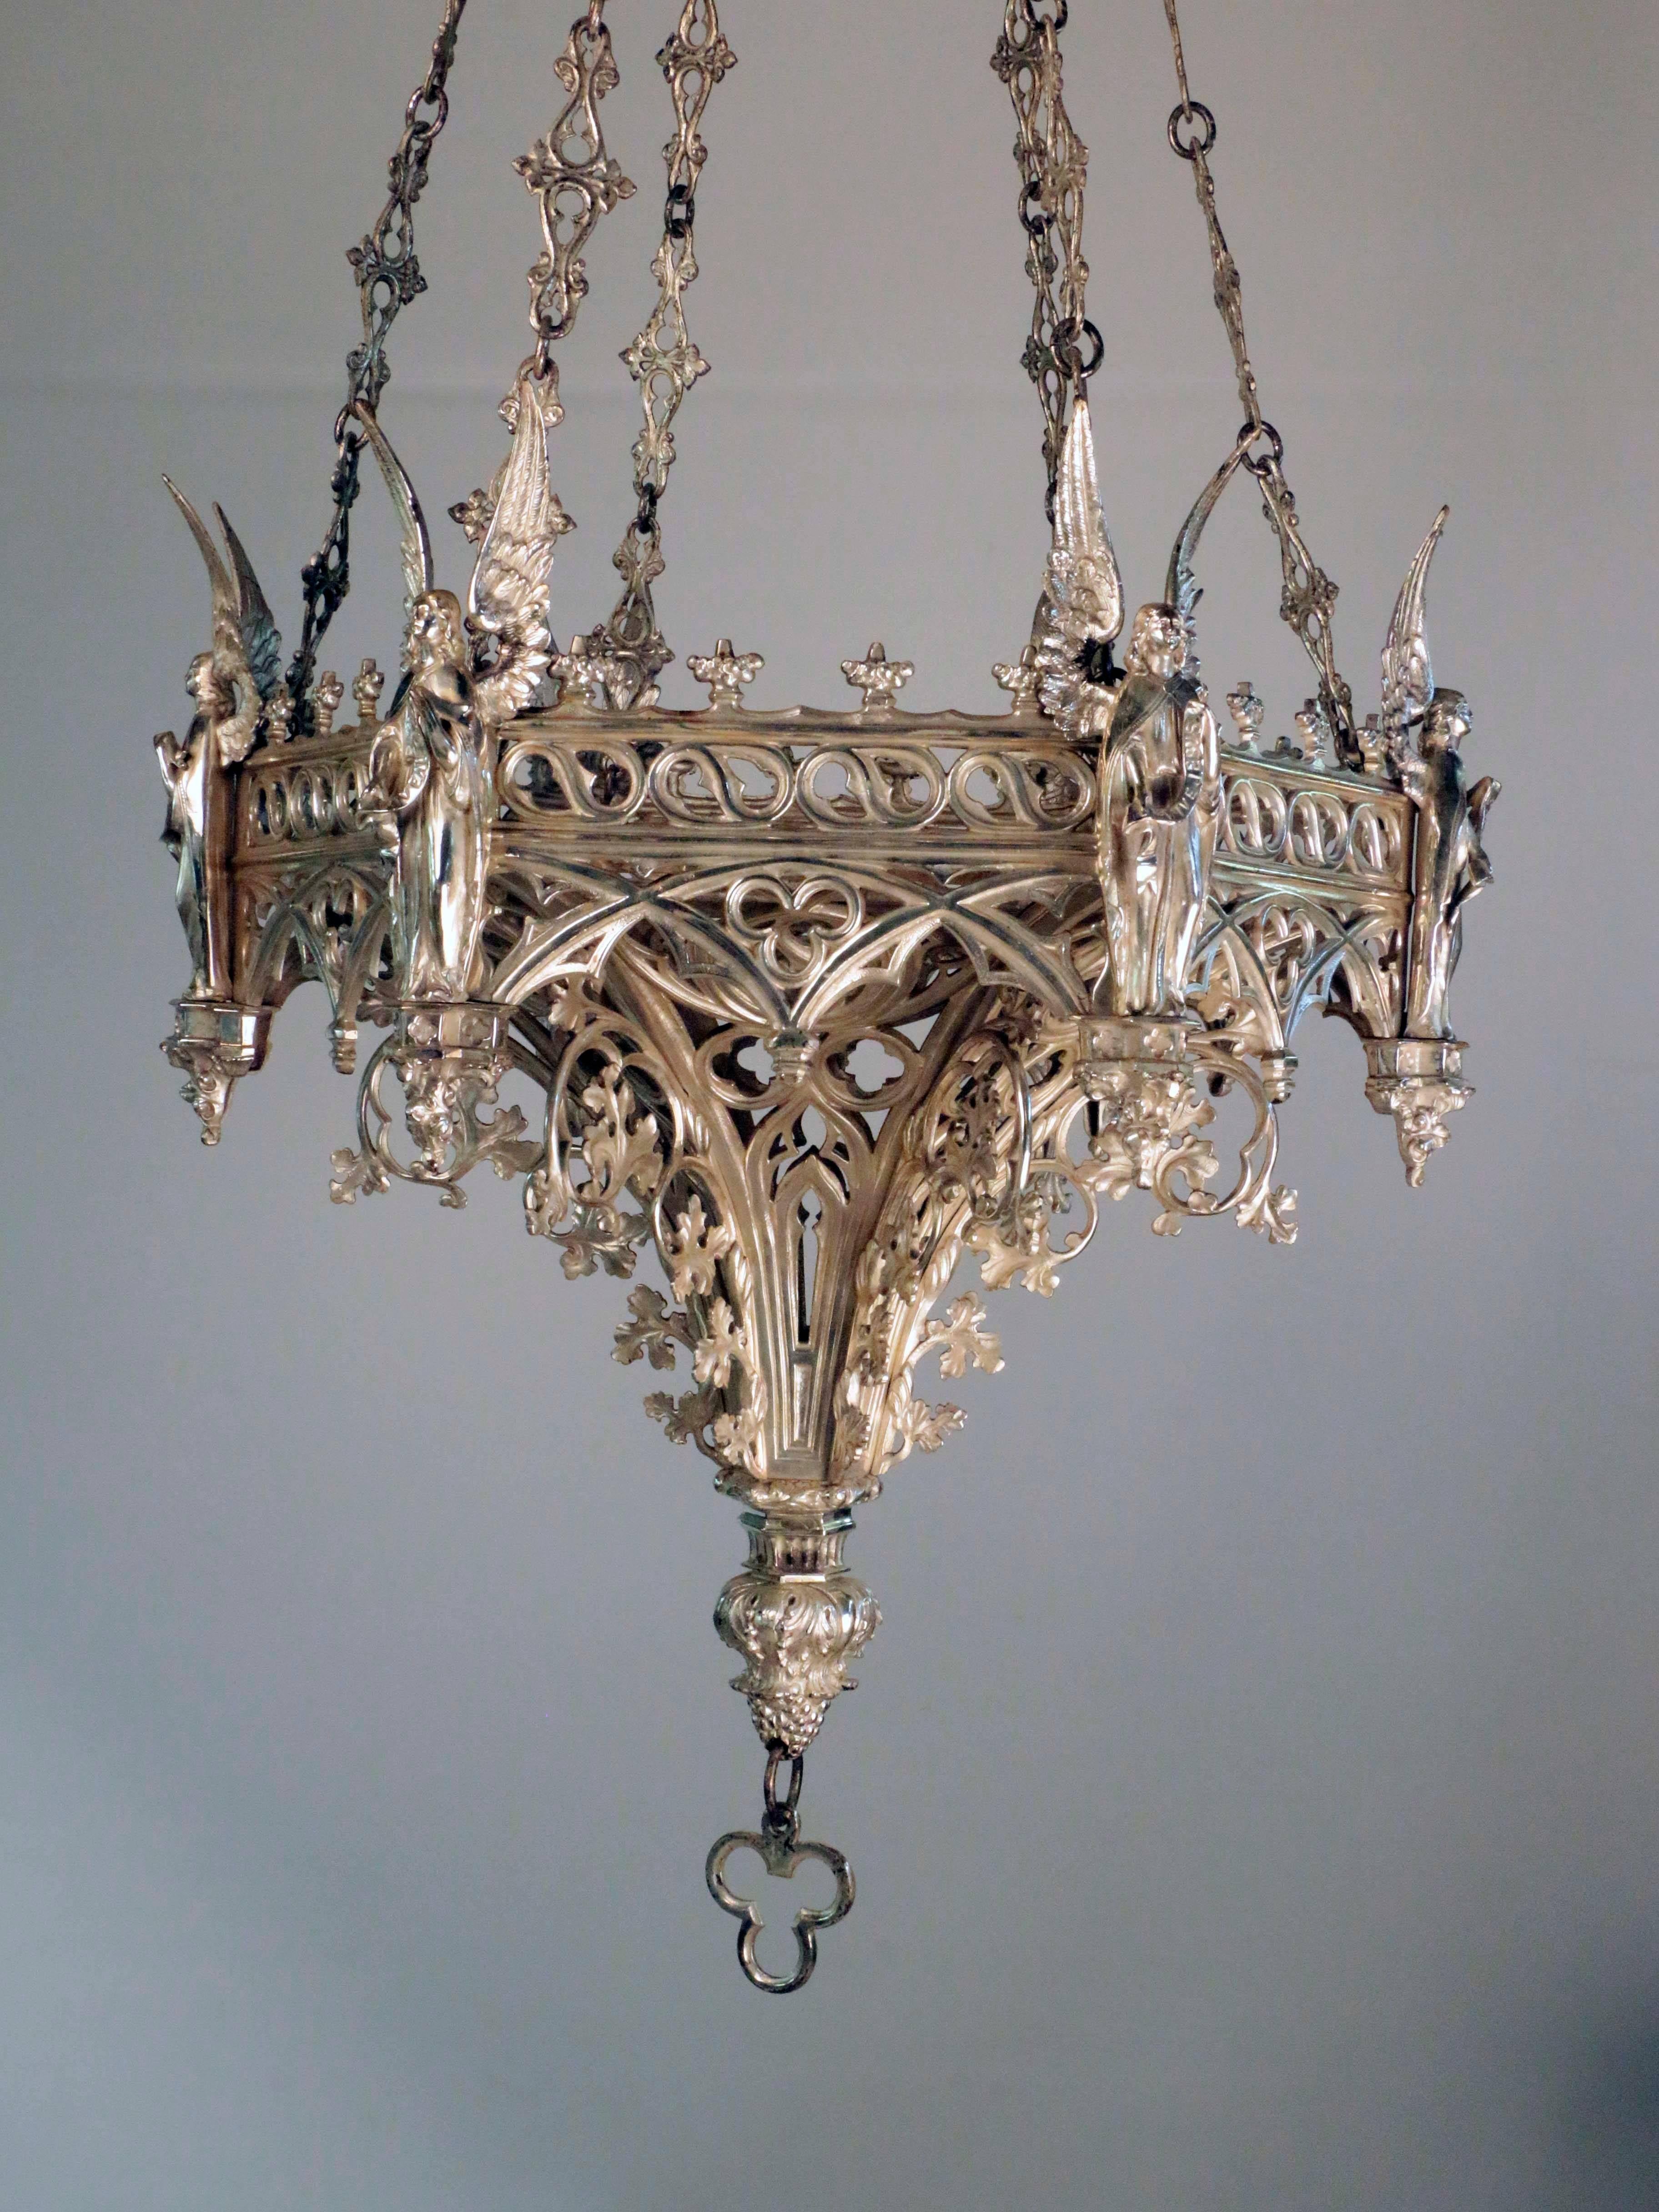 An antique French Neo-Gothic silvered bronze hanging fixture, hexagonal with an angel in relief at each corner amid pierced tracery and crocketing in high Gothic style. The fixture tapers beneath the band of angels and the canopy mimics the